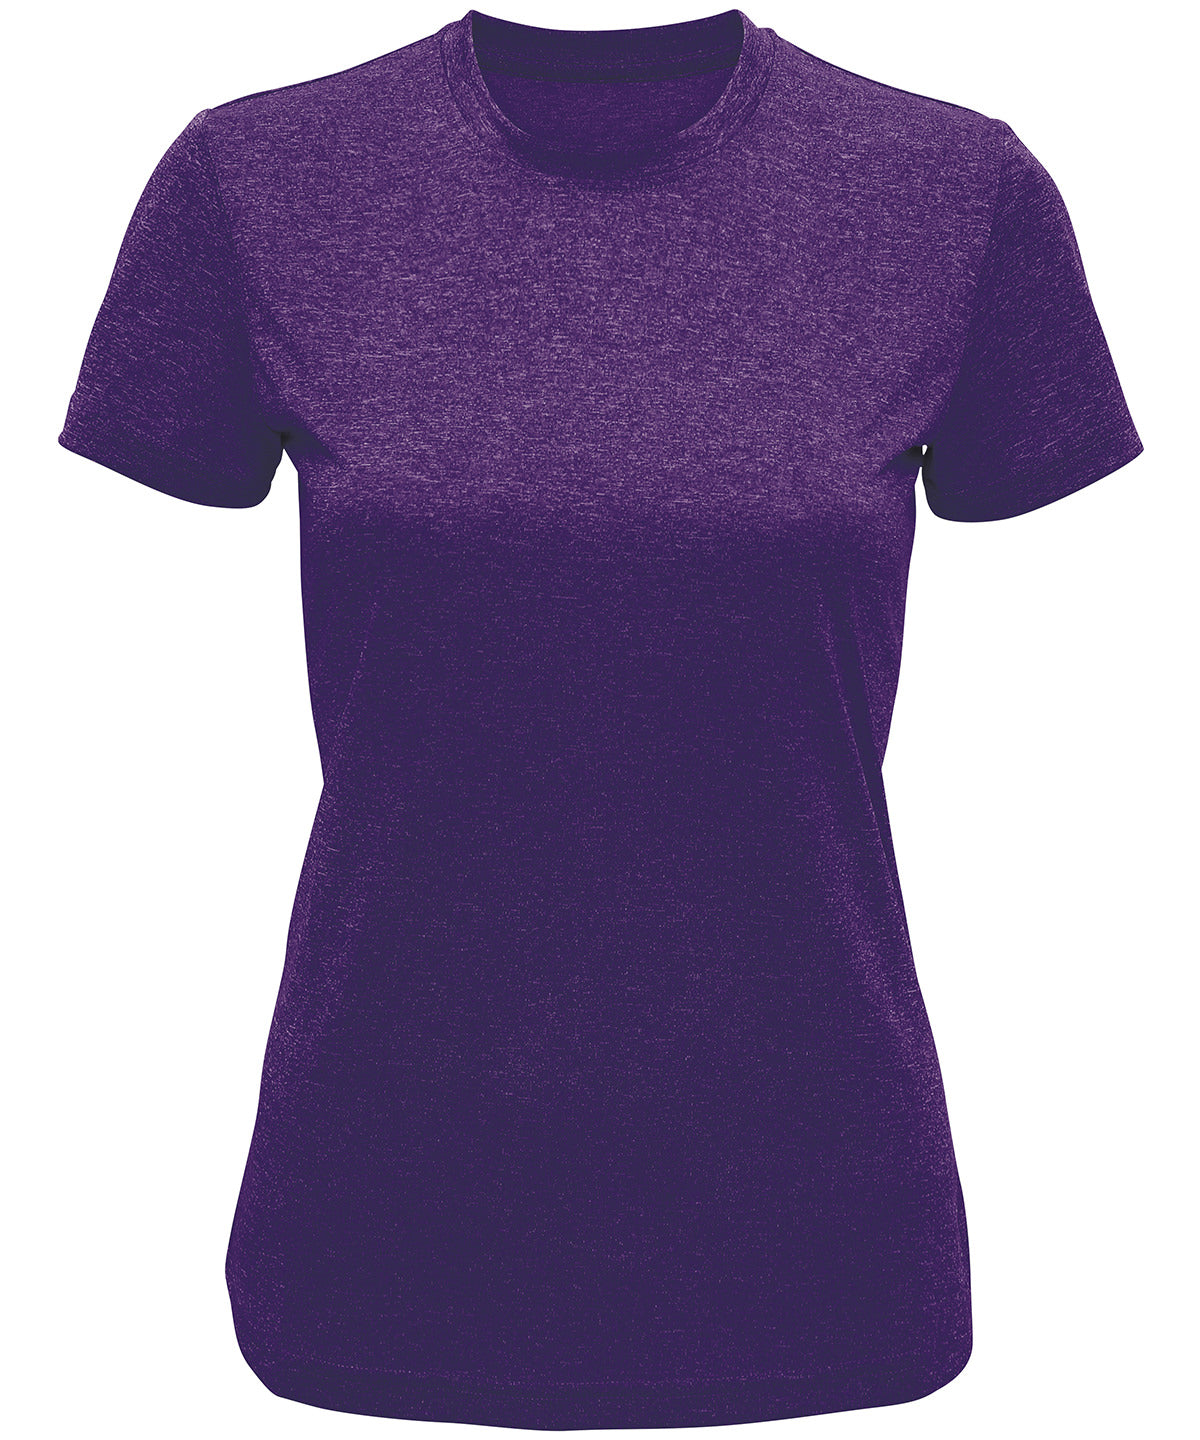 Purple Melange - Women's TriDri® performance t-shirt T-Shirts TriDri® Activewear & Performance, Athleisurewear, Back to the Gym, Exclusives, Gymwear, Hyperbrights and Neons, Must Haves, New Colours For 2022, Outdoor Sports, Rebrandable, Sports & Leisure, T-Shirts & Vests, Team Sportswear, UPF Protection Schoolwear Centres